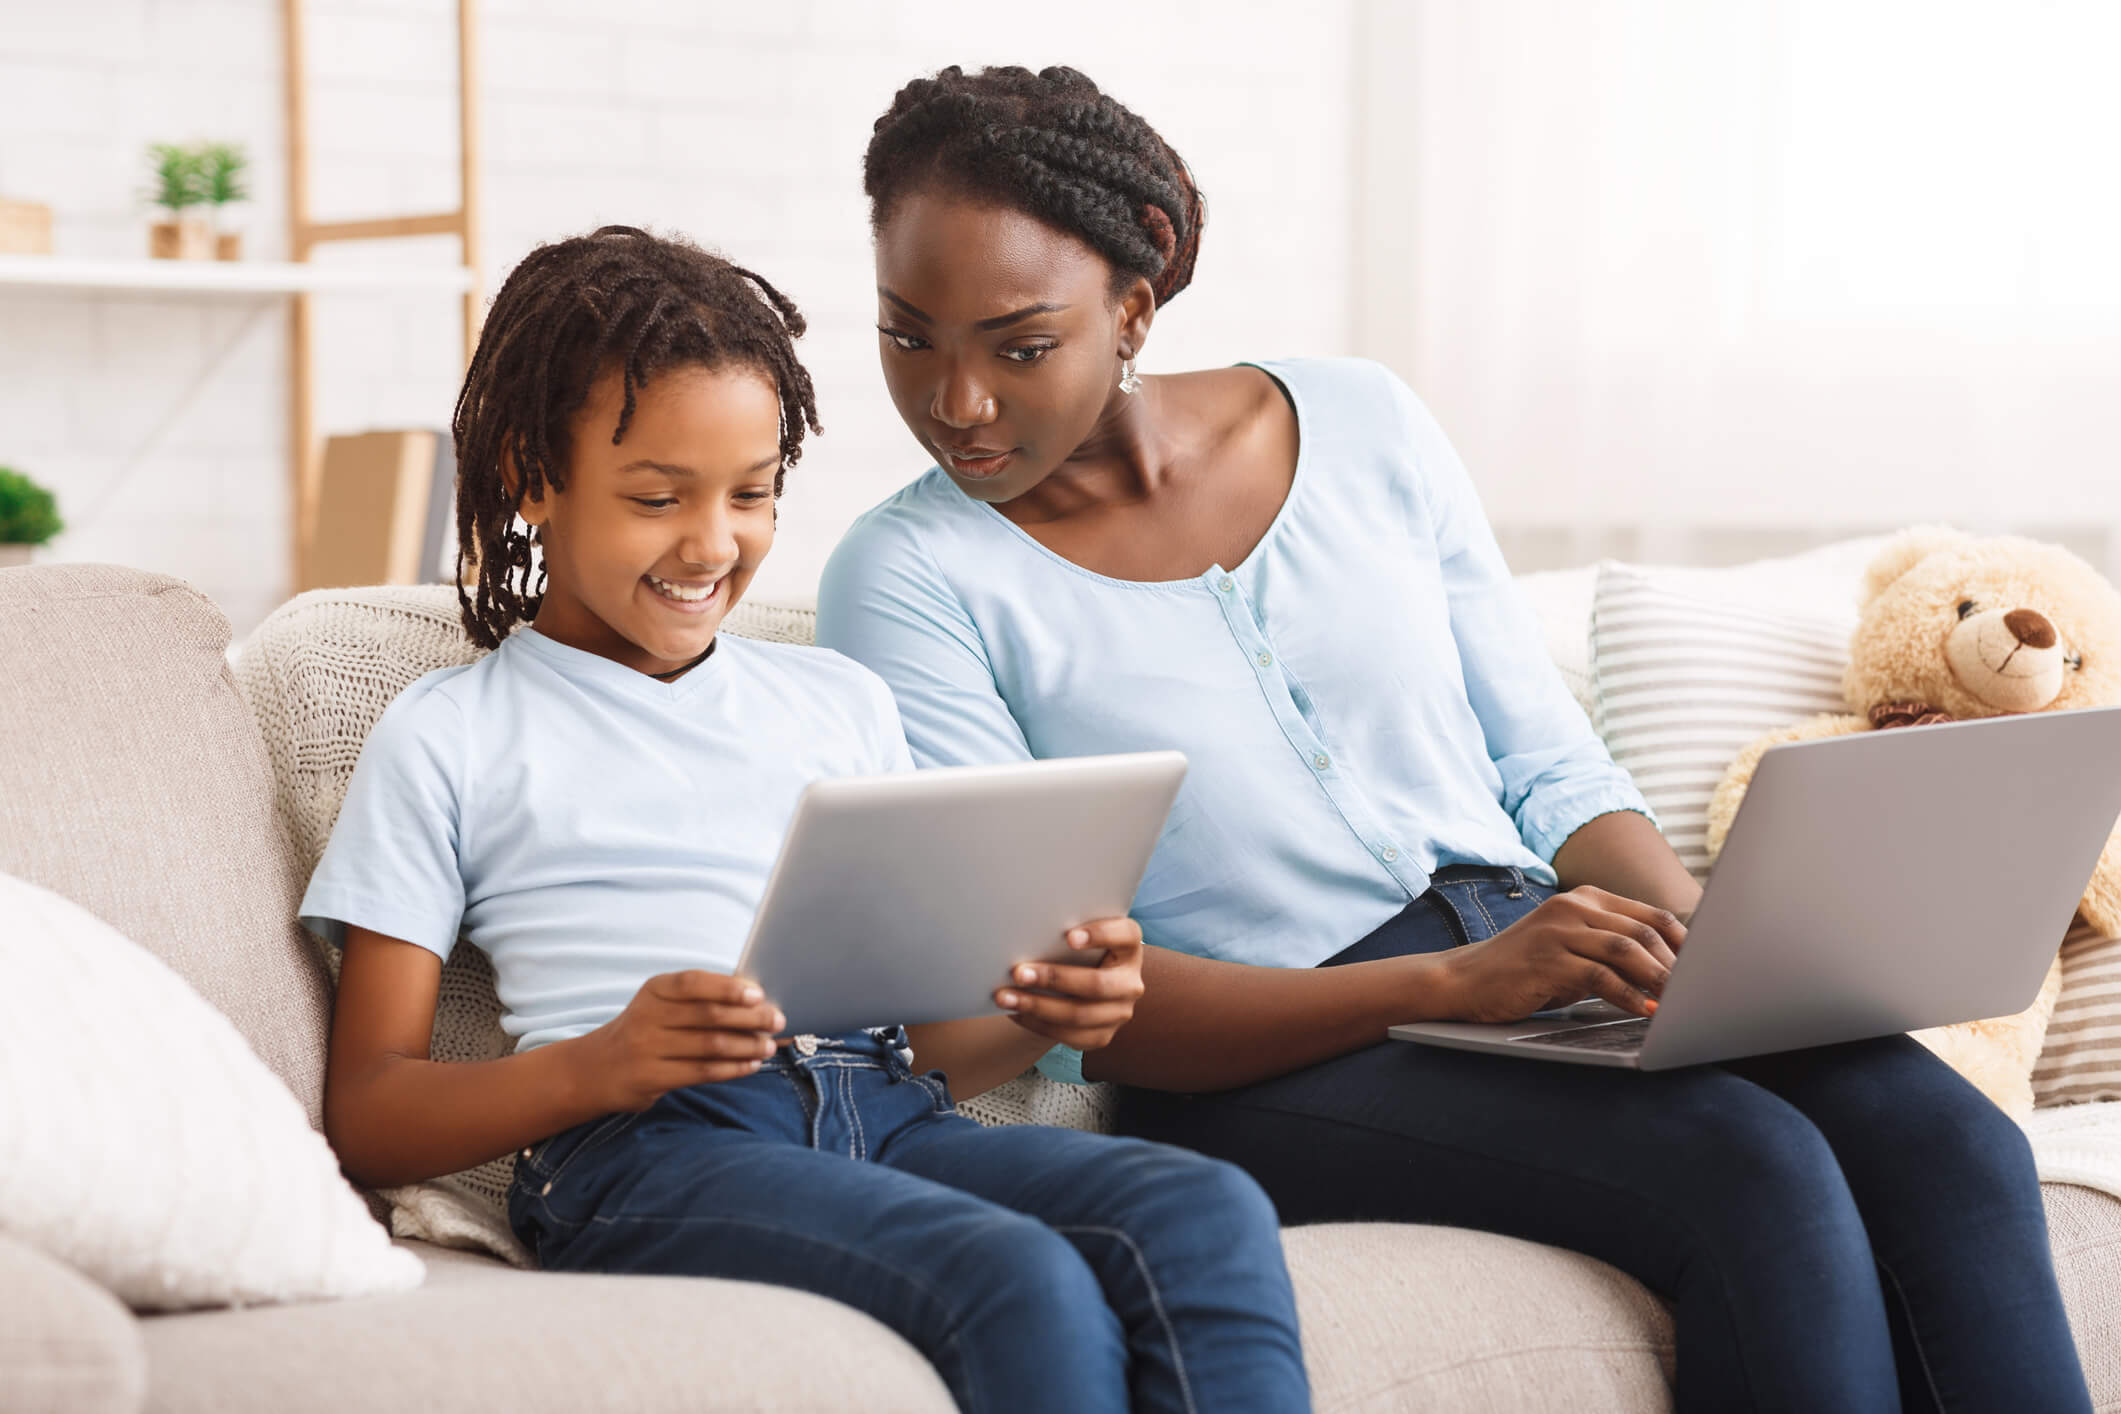 how to protect your kids online - image of mom and daughter